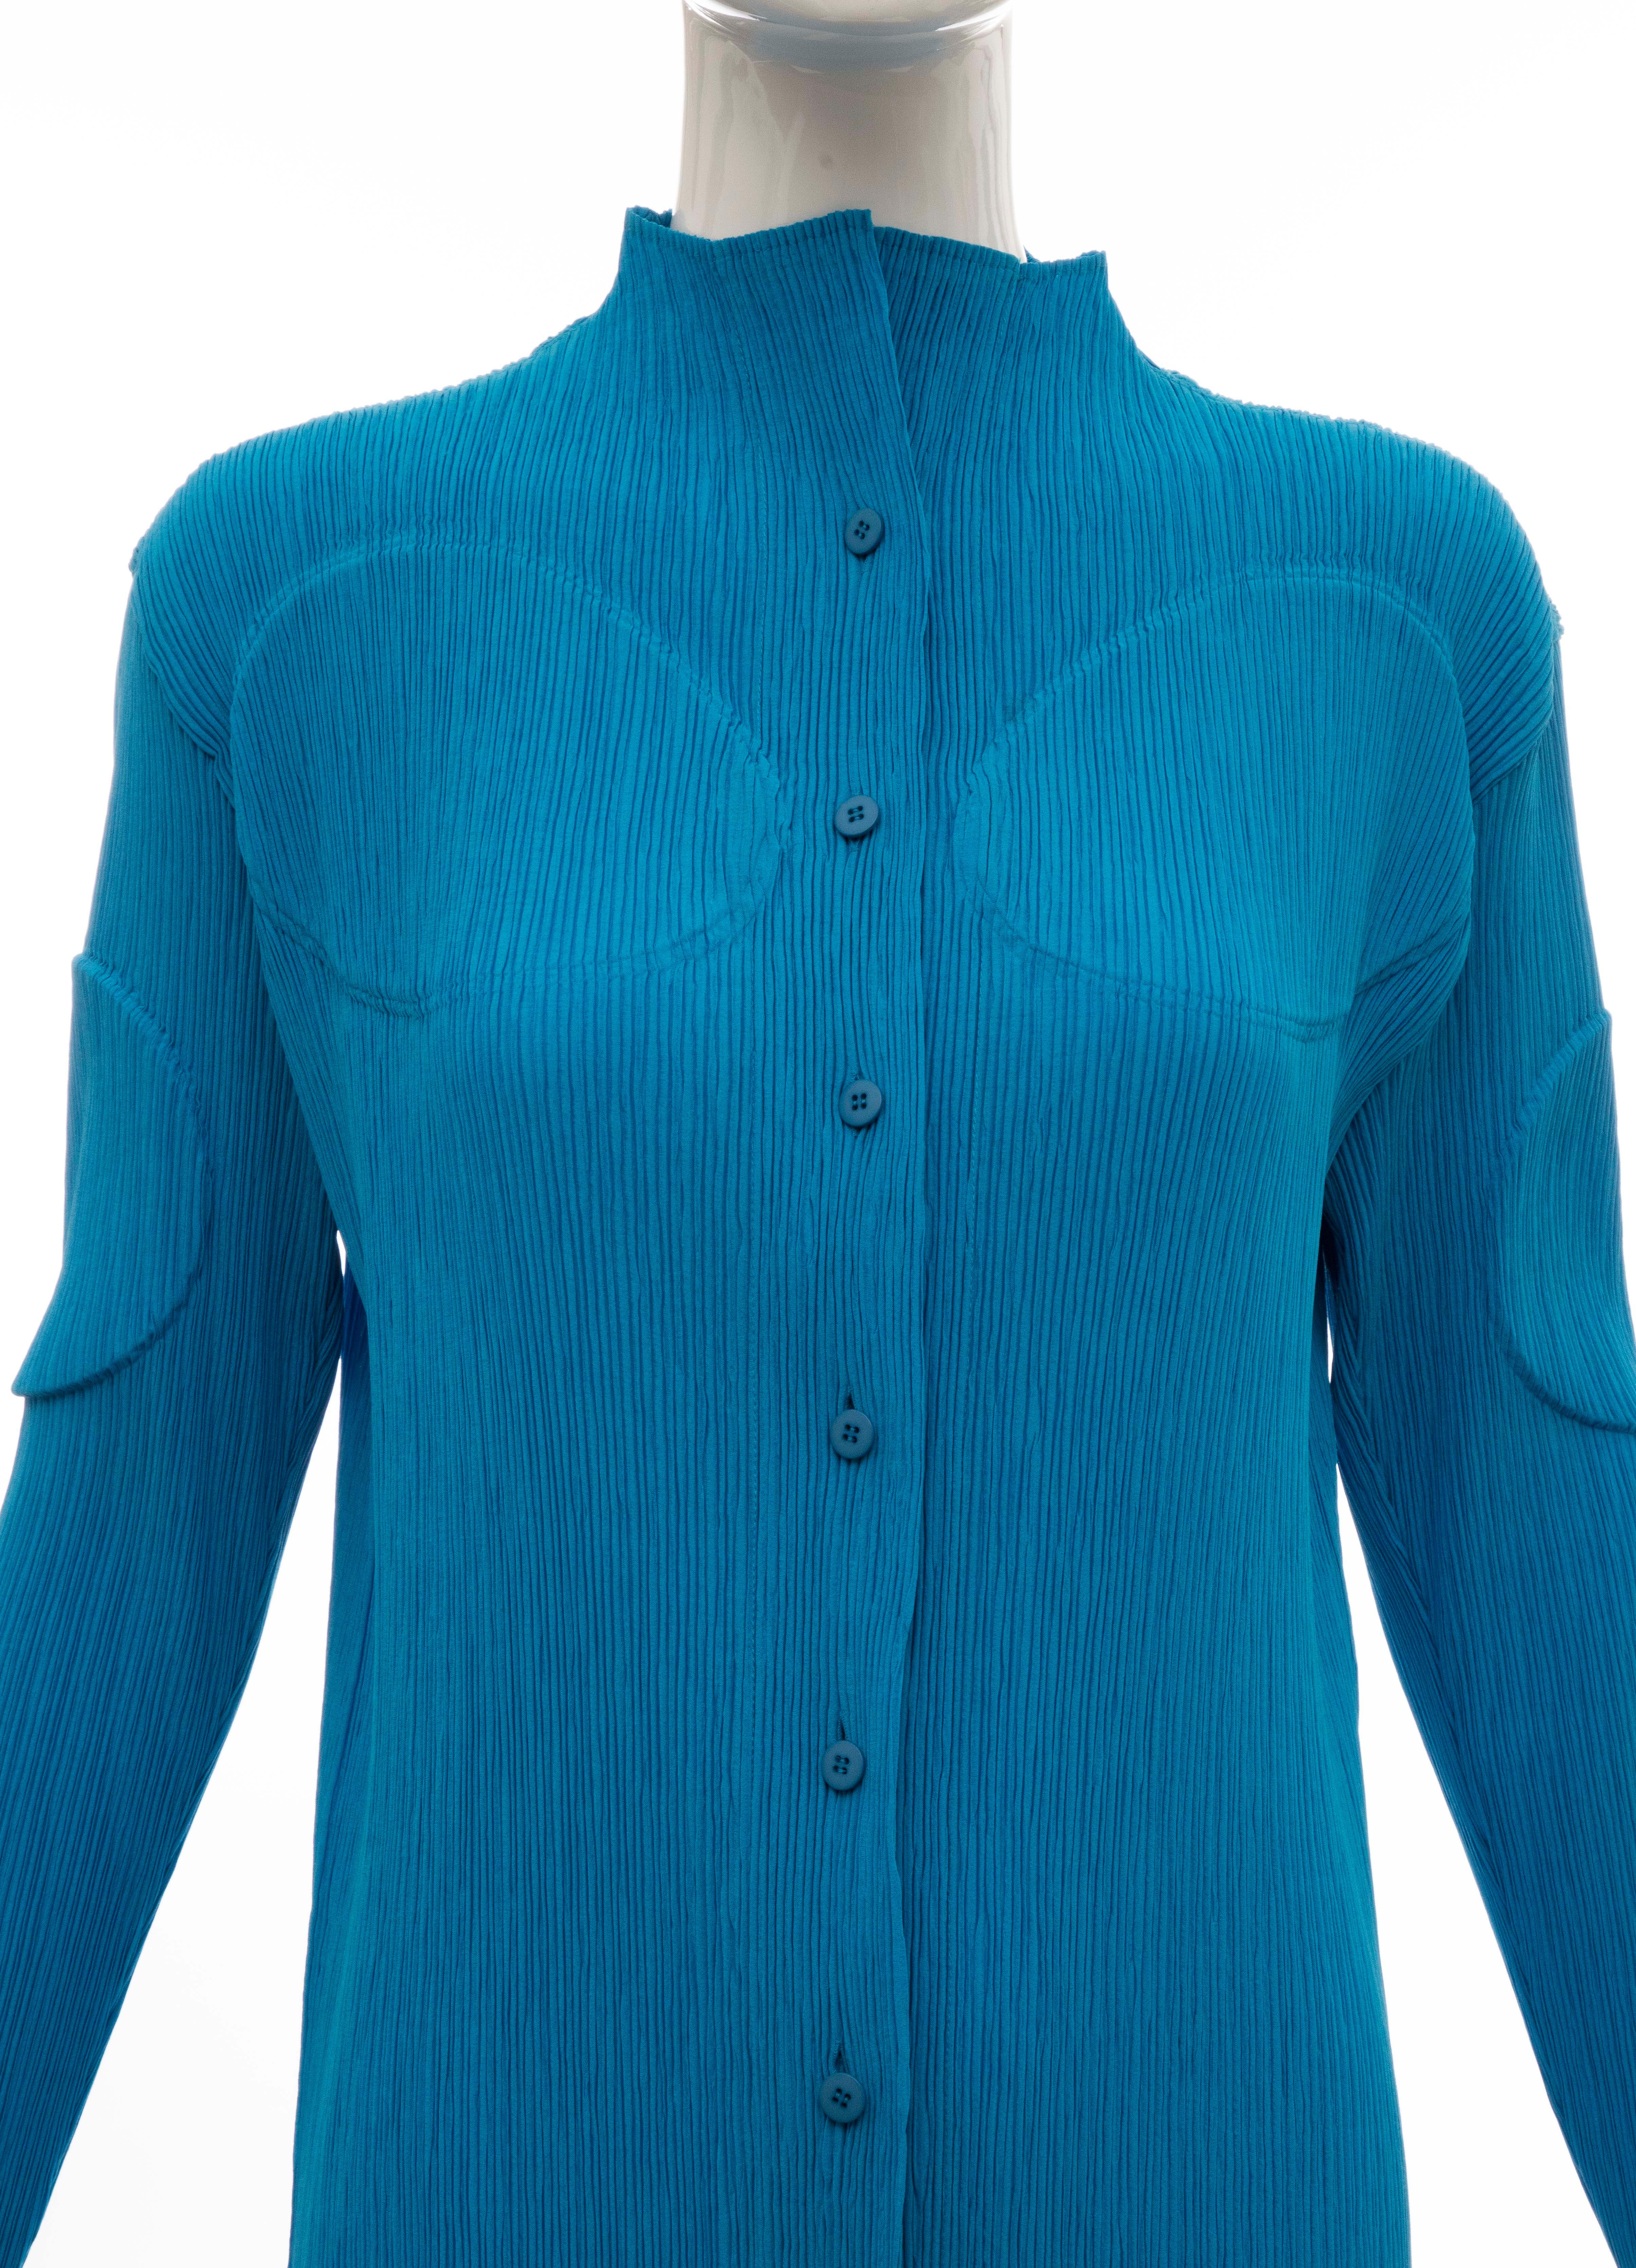 Women's Issey Miyake Turquoise Long Button Front Cardigan, Circa 1990s For Sale